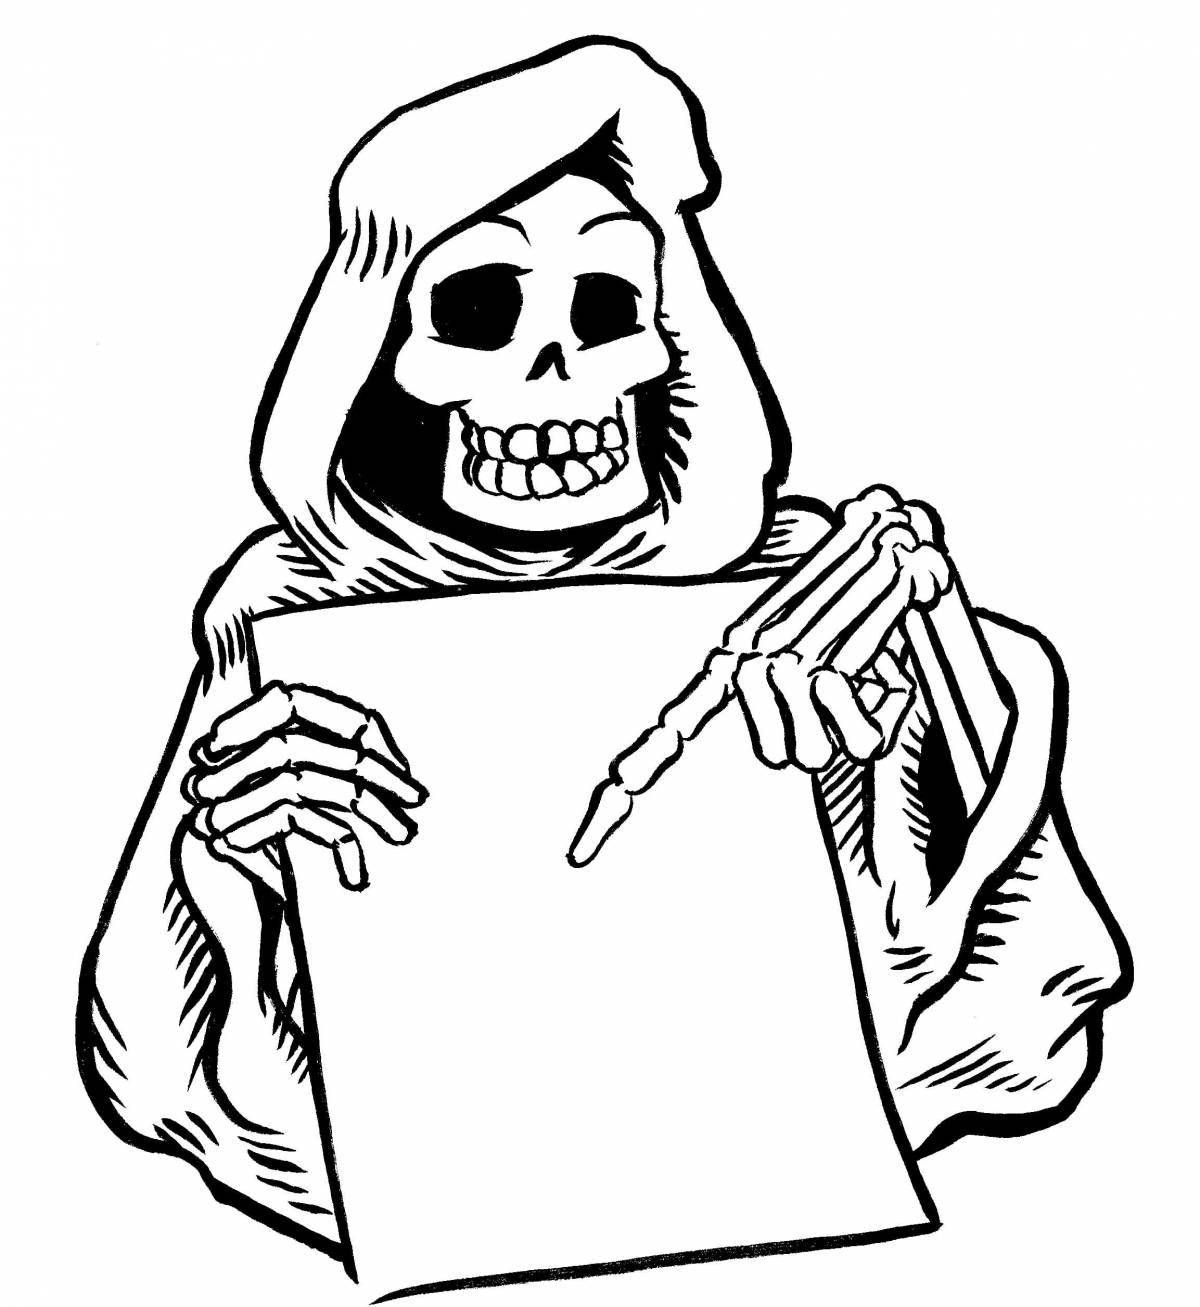 Spooky horror coloring pages for kids